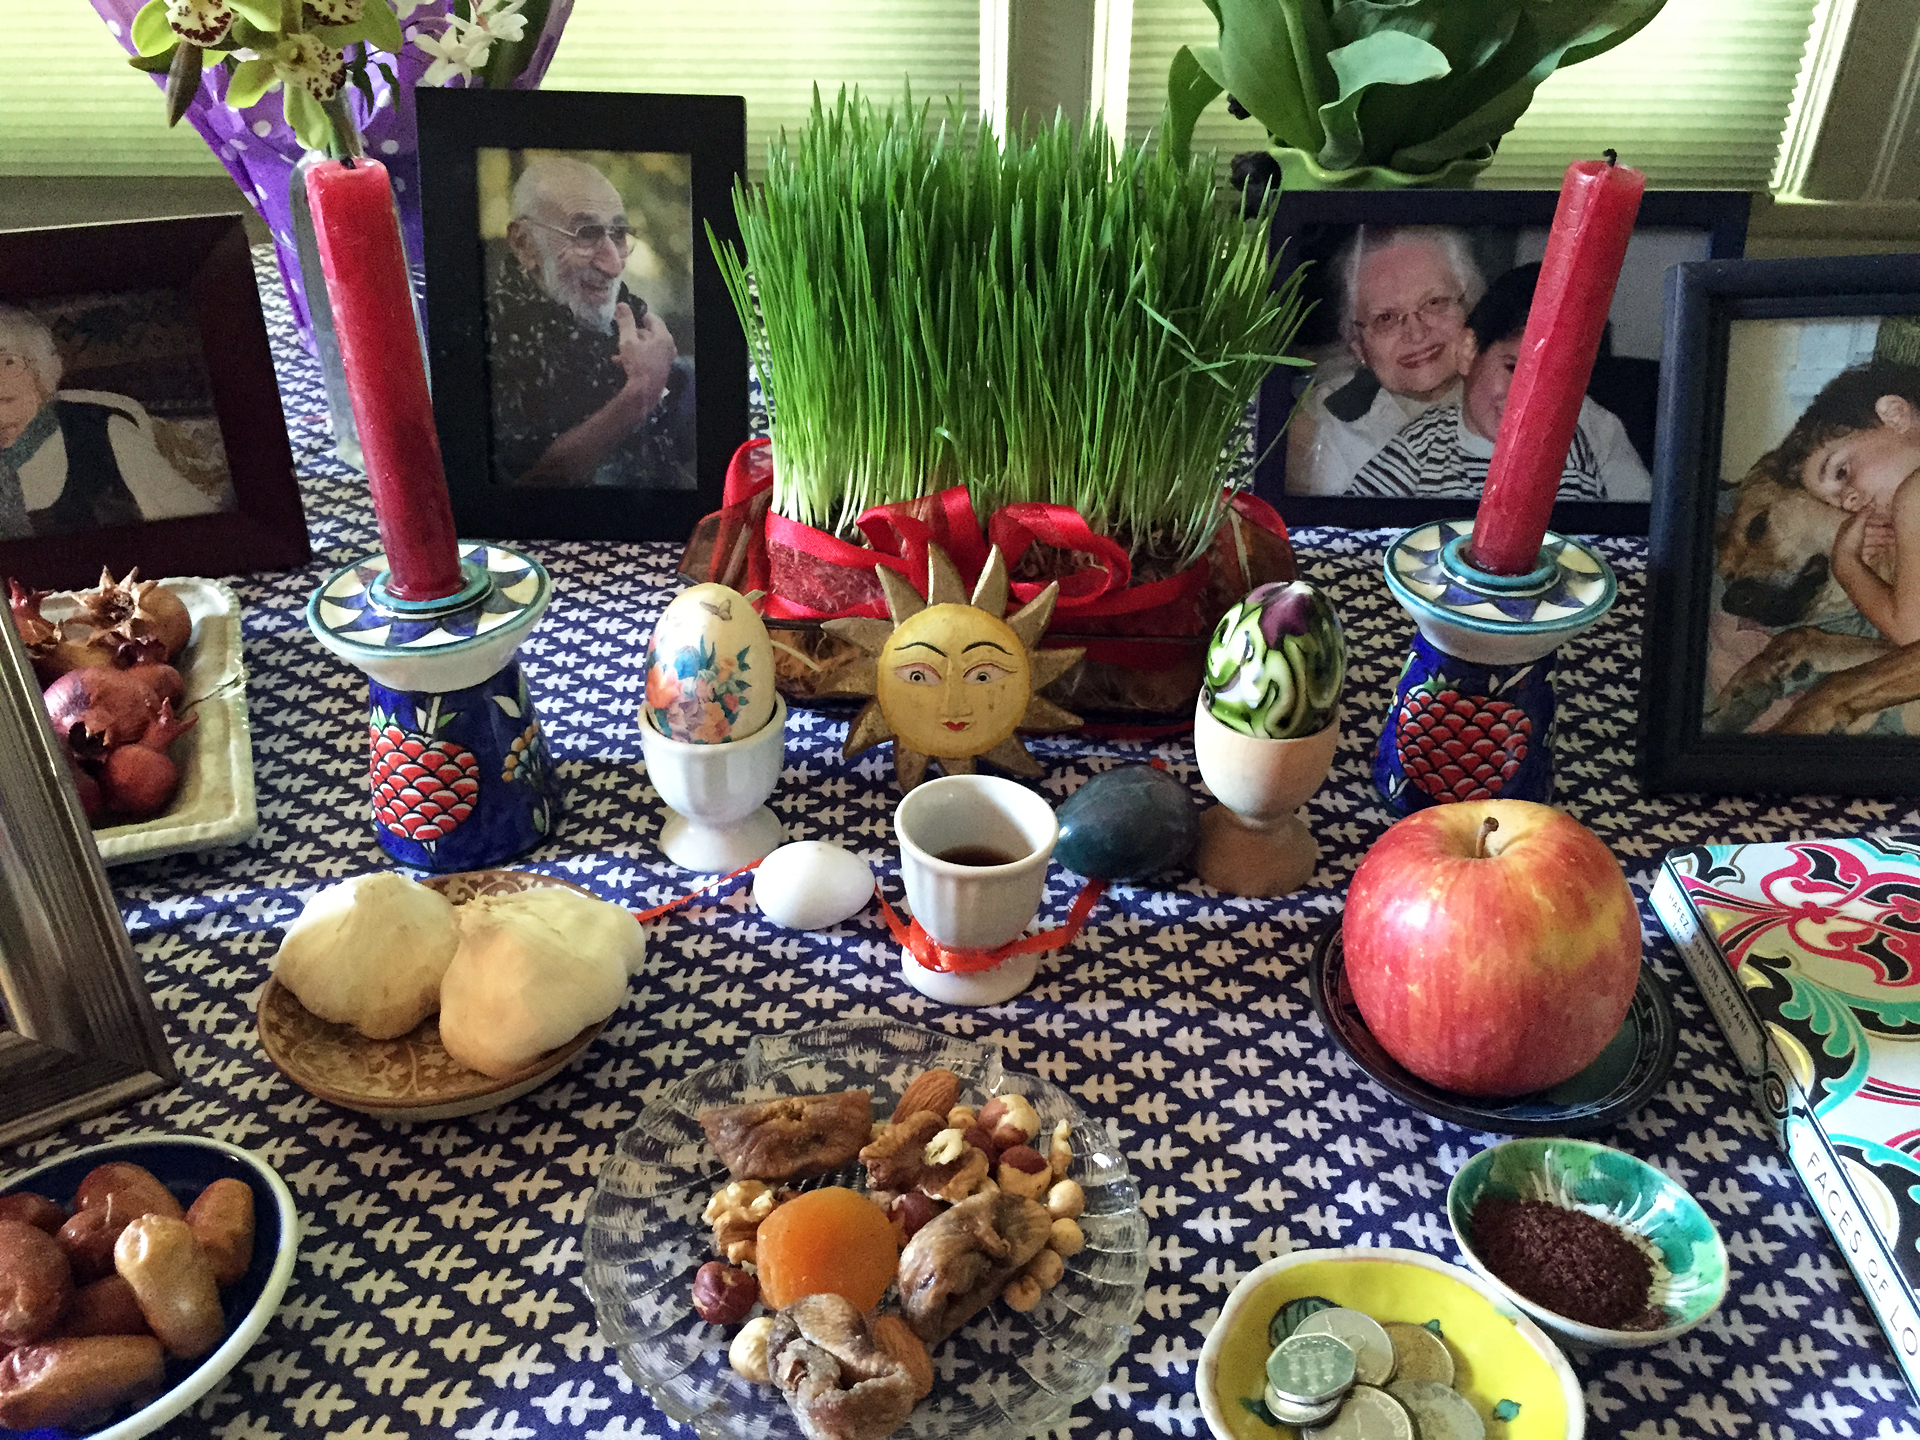 The Persian New Year begins on the first day of Spring. To celebrate, families create a 'haftsin,' a table decorated elaborately with different foods like fresh apples and sprouted herbs.